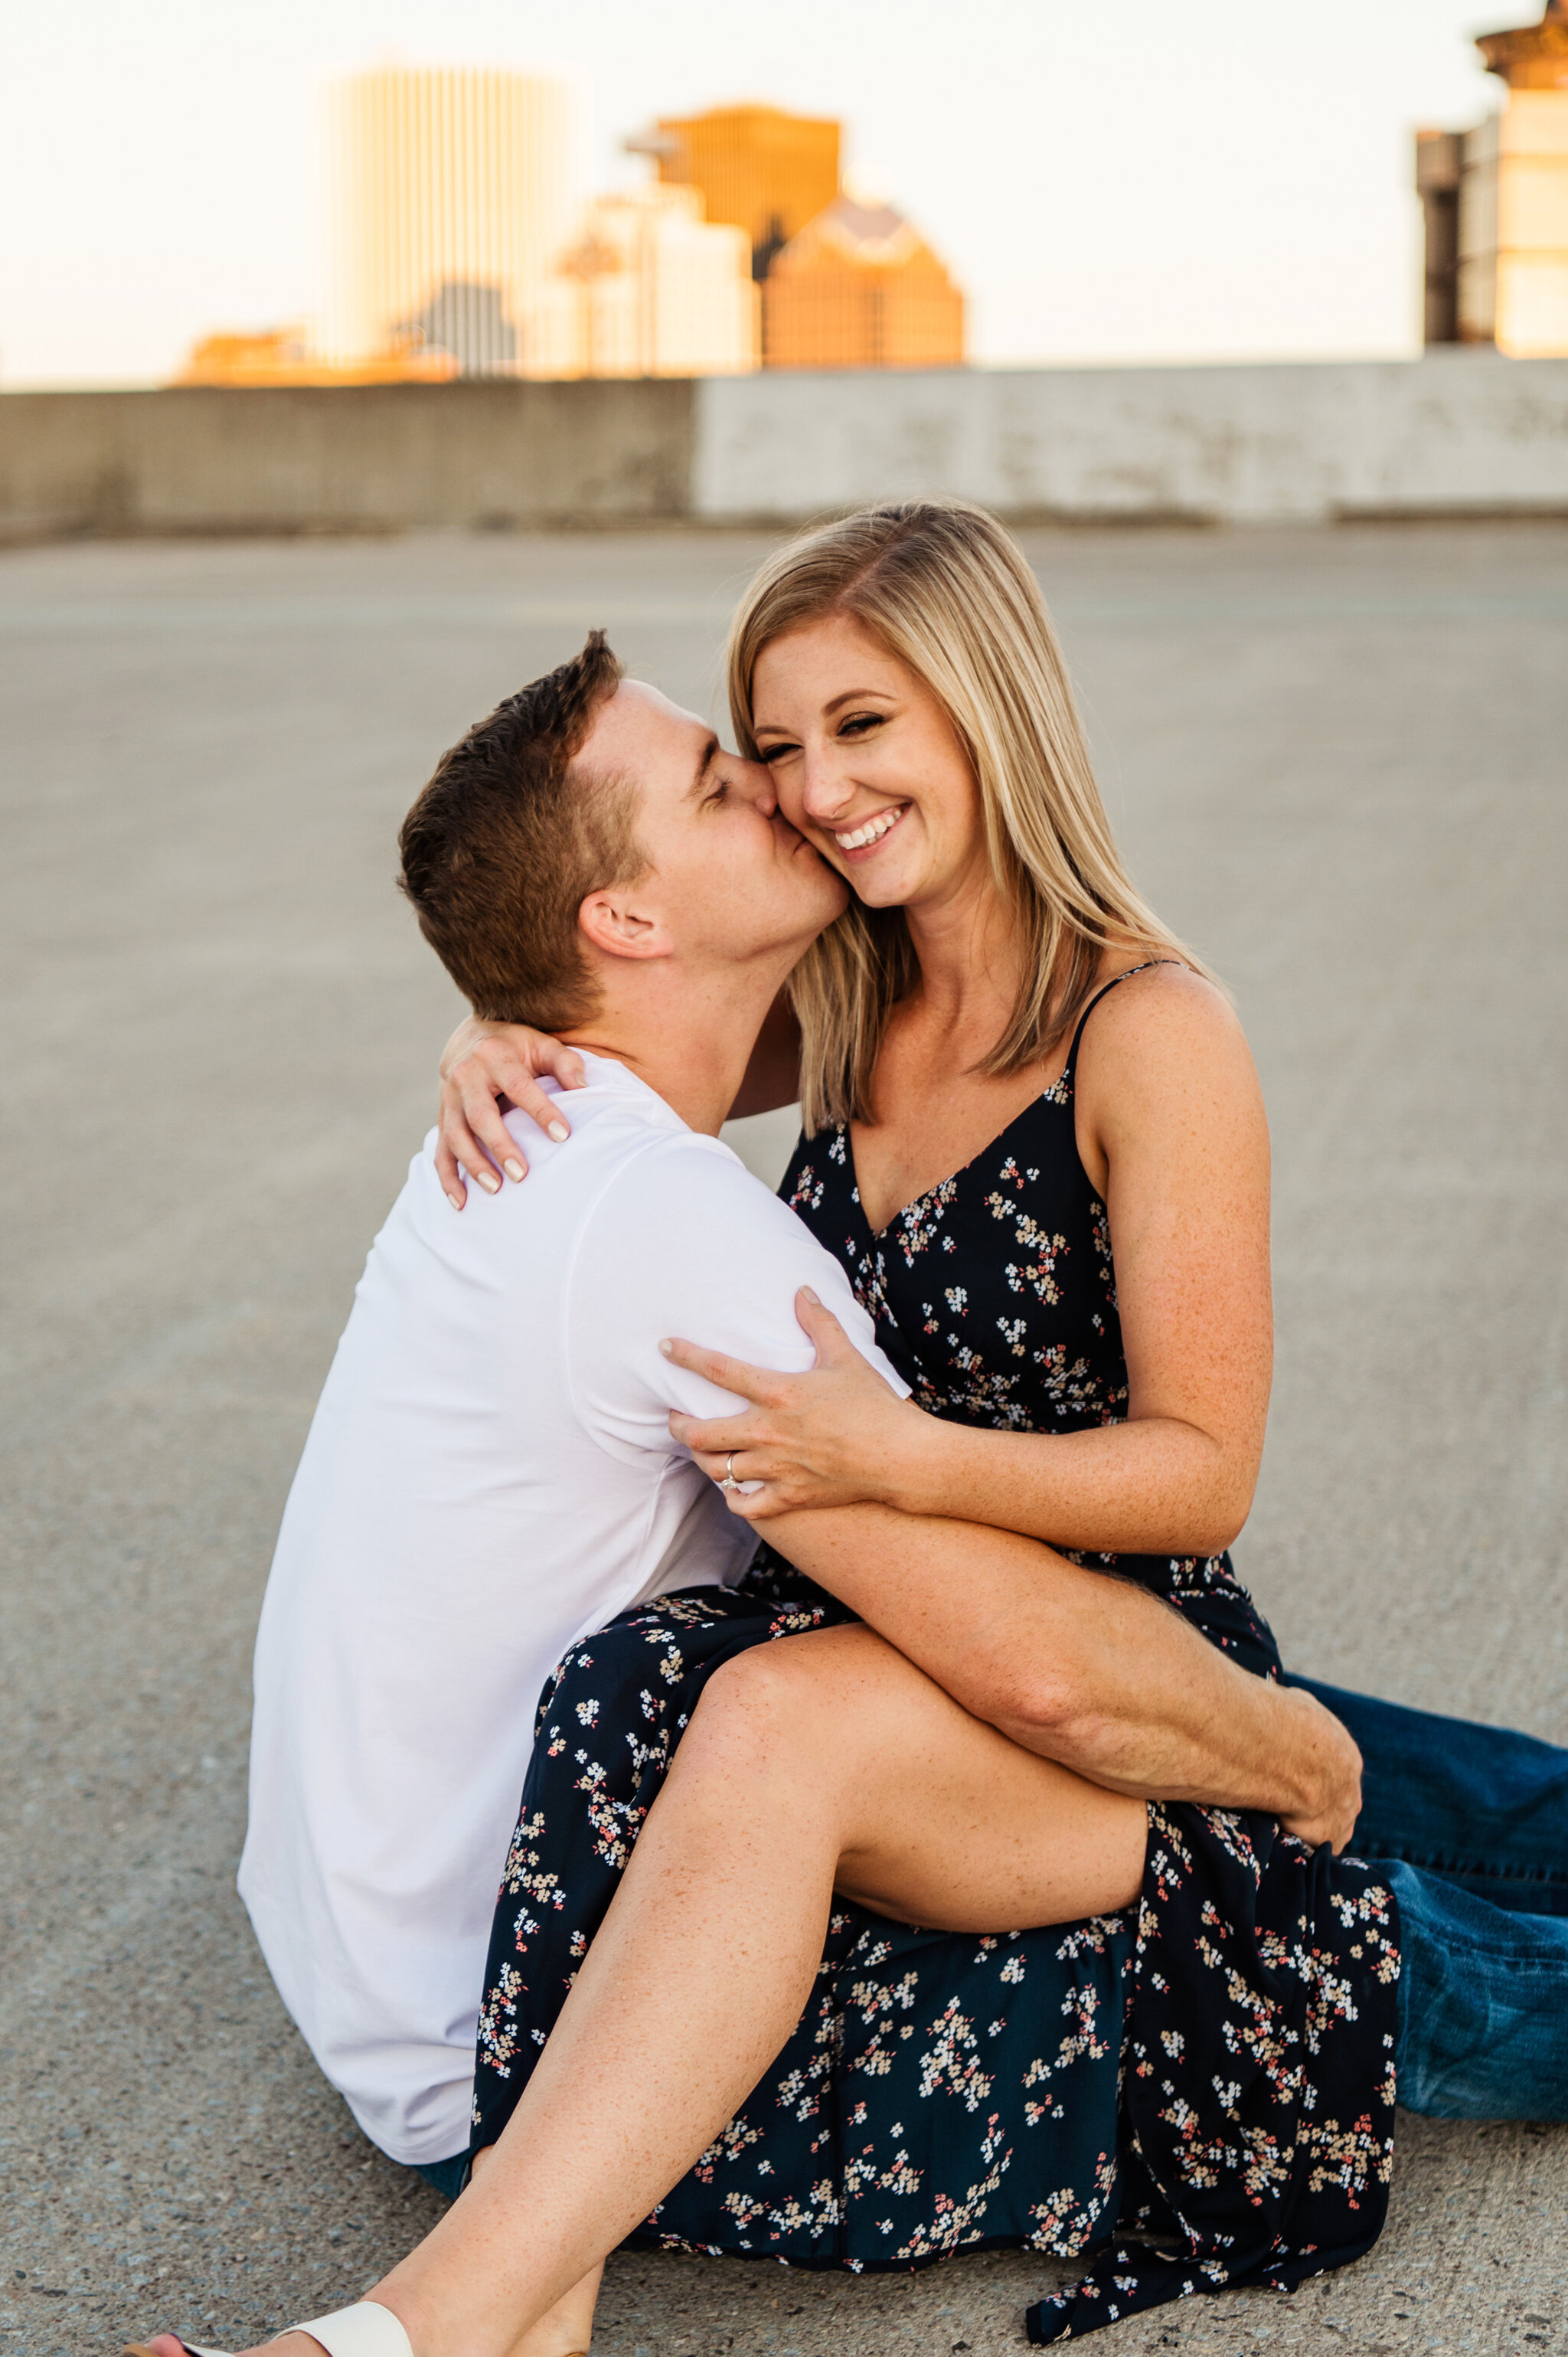 Genesee_Brew_House_High_Falls_Rochester_Engagement_Session_JILL_STUDIO_Rochester_NY_Photographer_5816.jpg